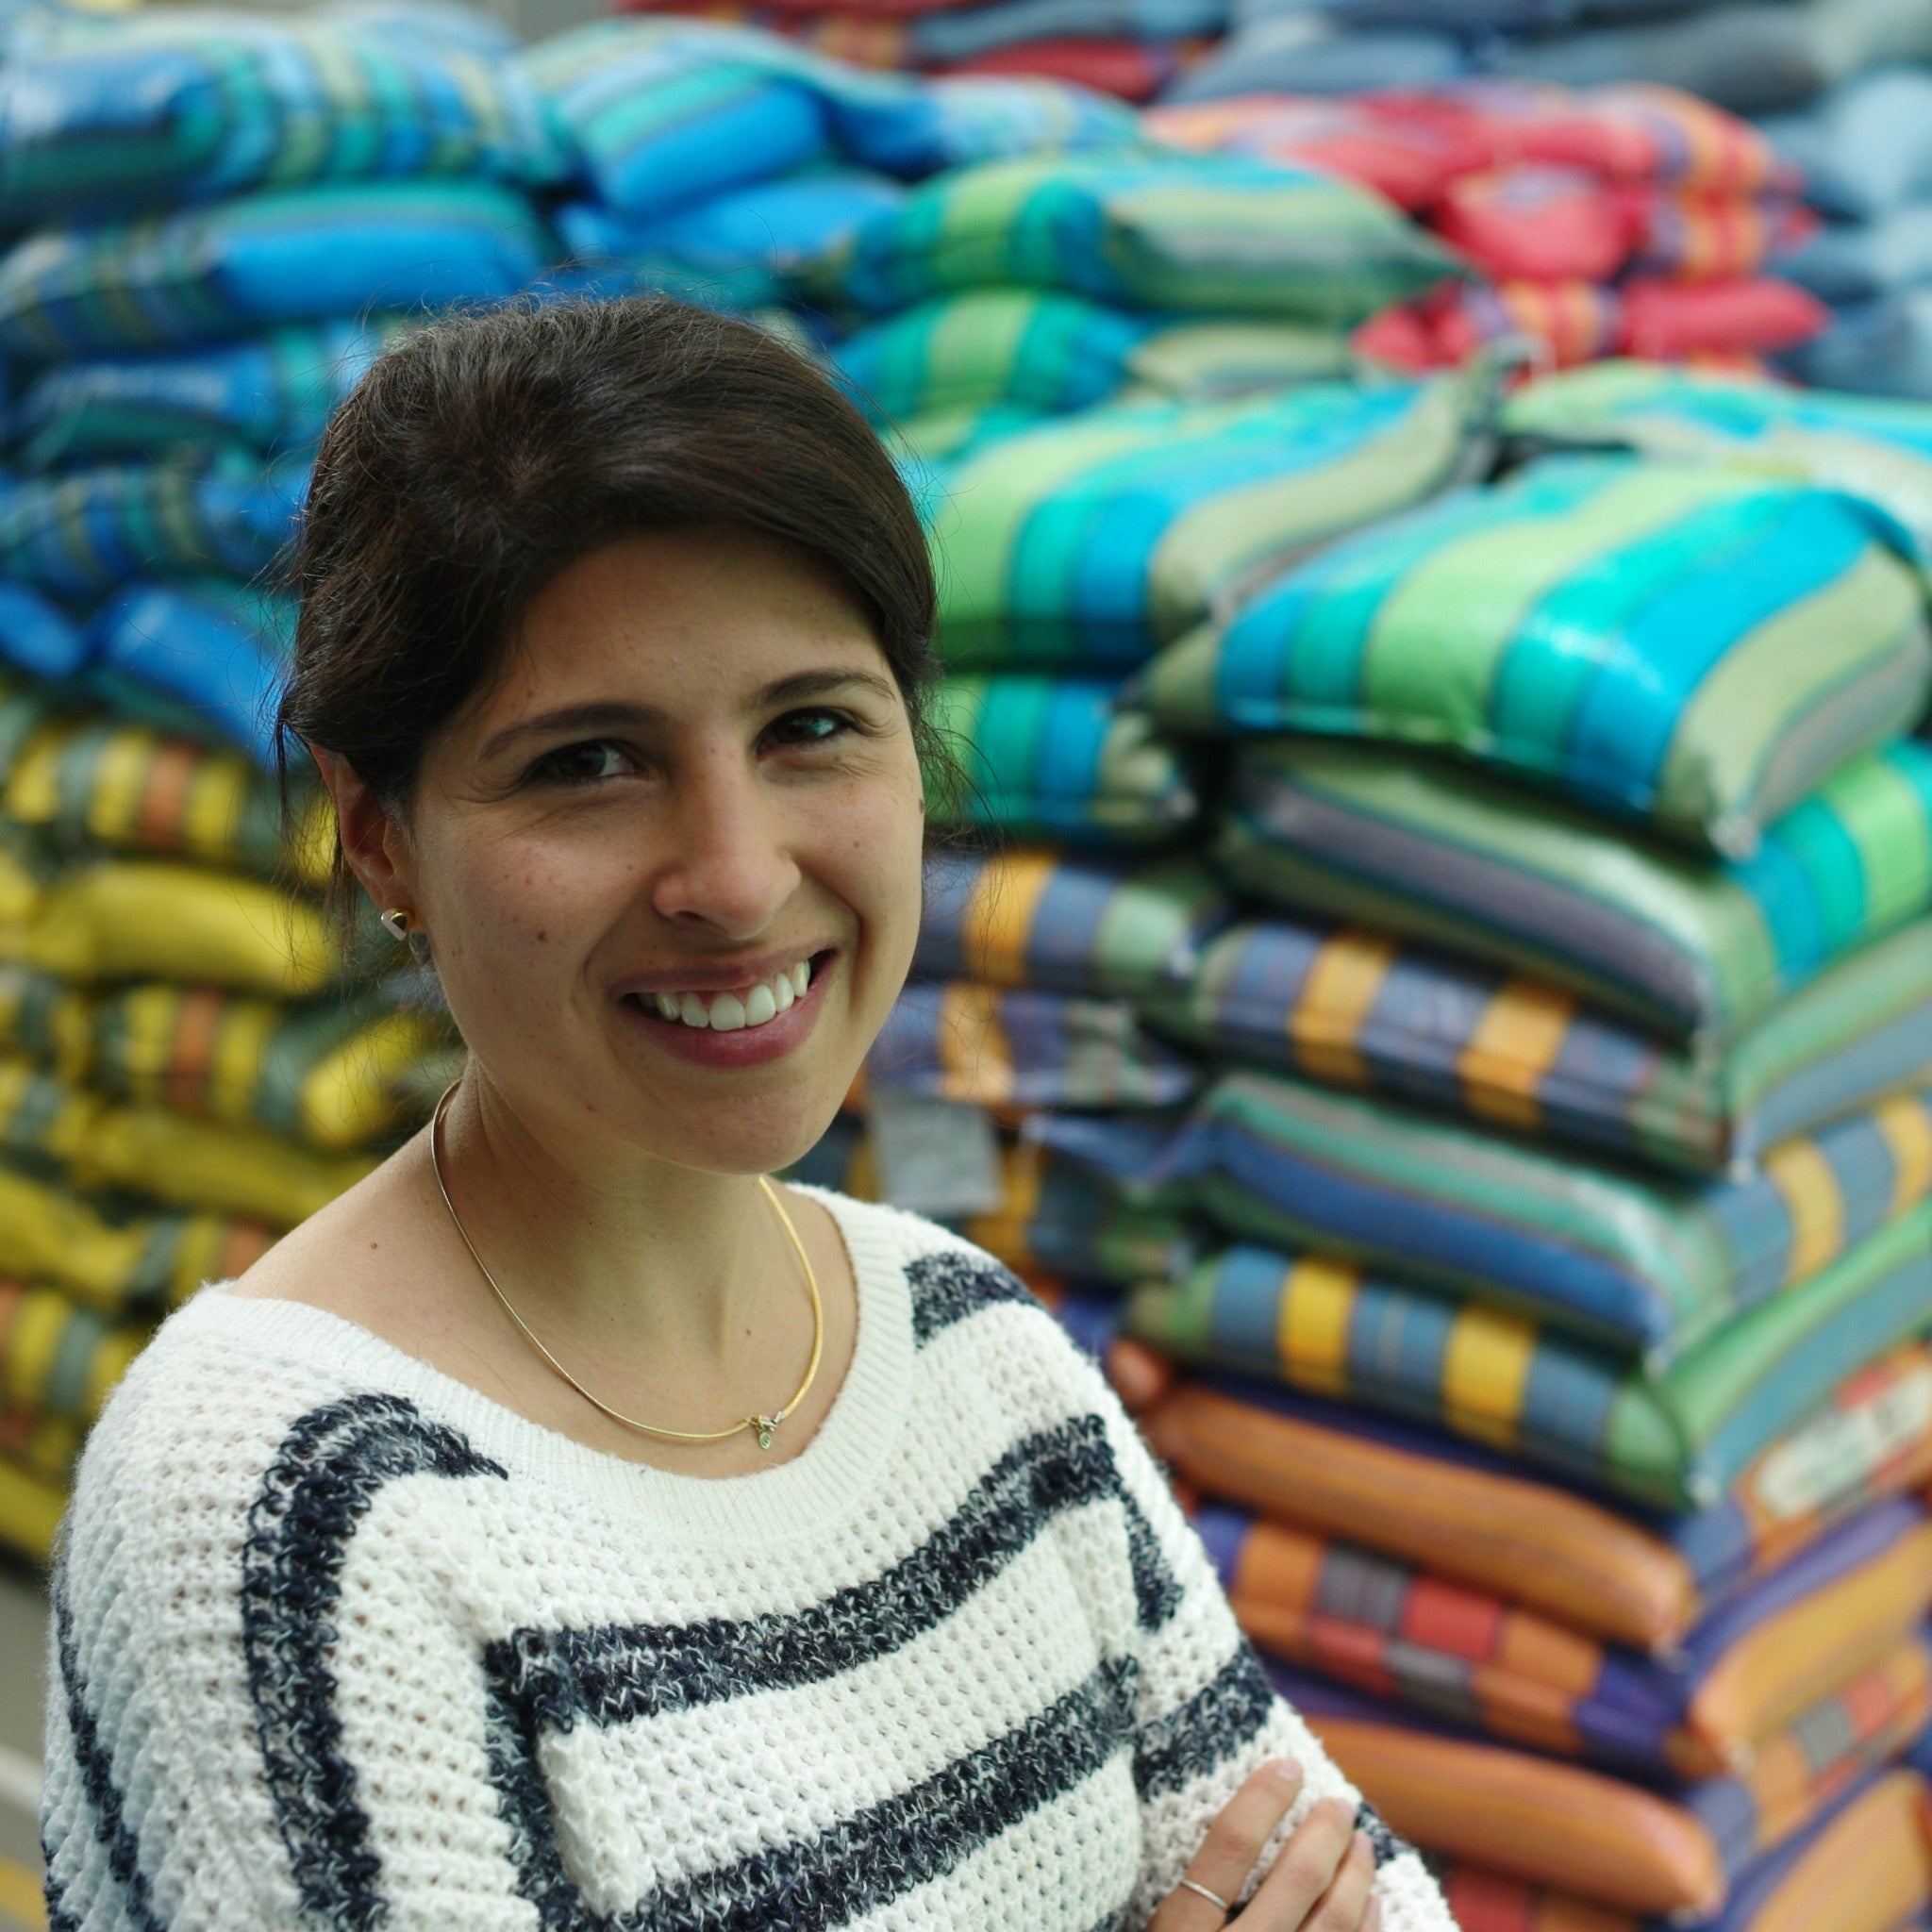 A smiling person in a warehouse with arms folded looks towards the camera with sacks of speciality coffee piled behind